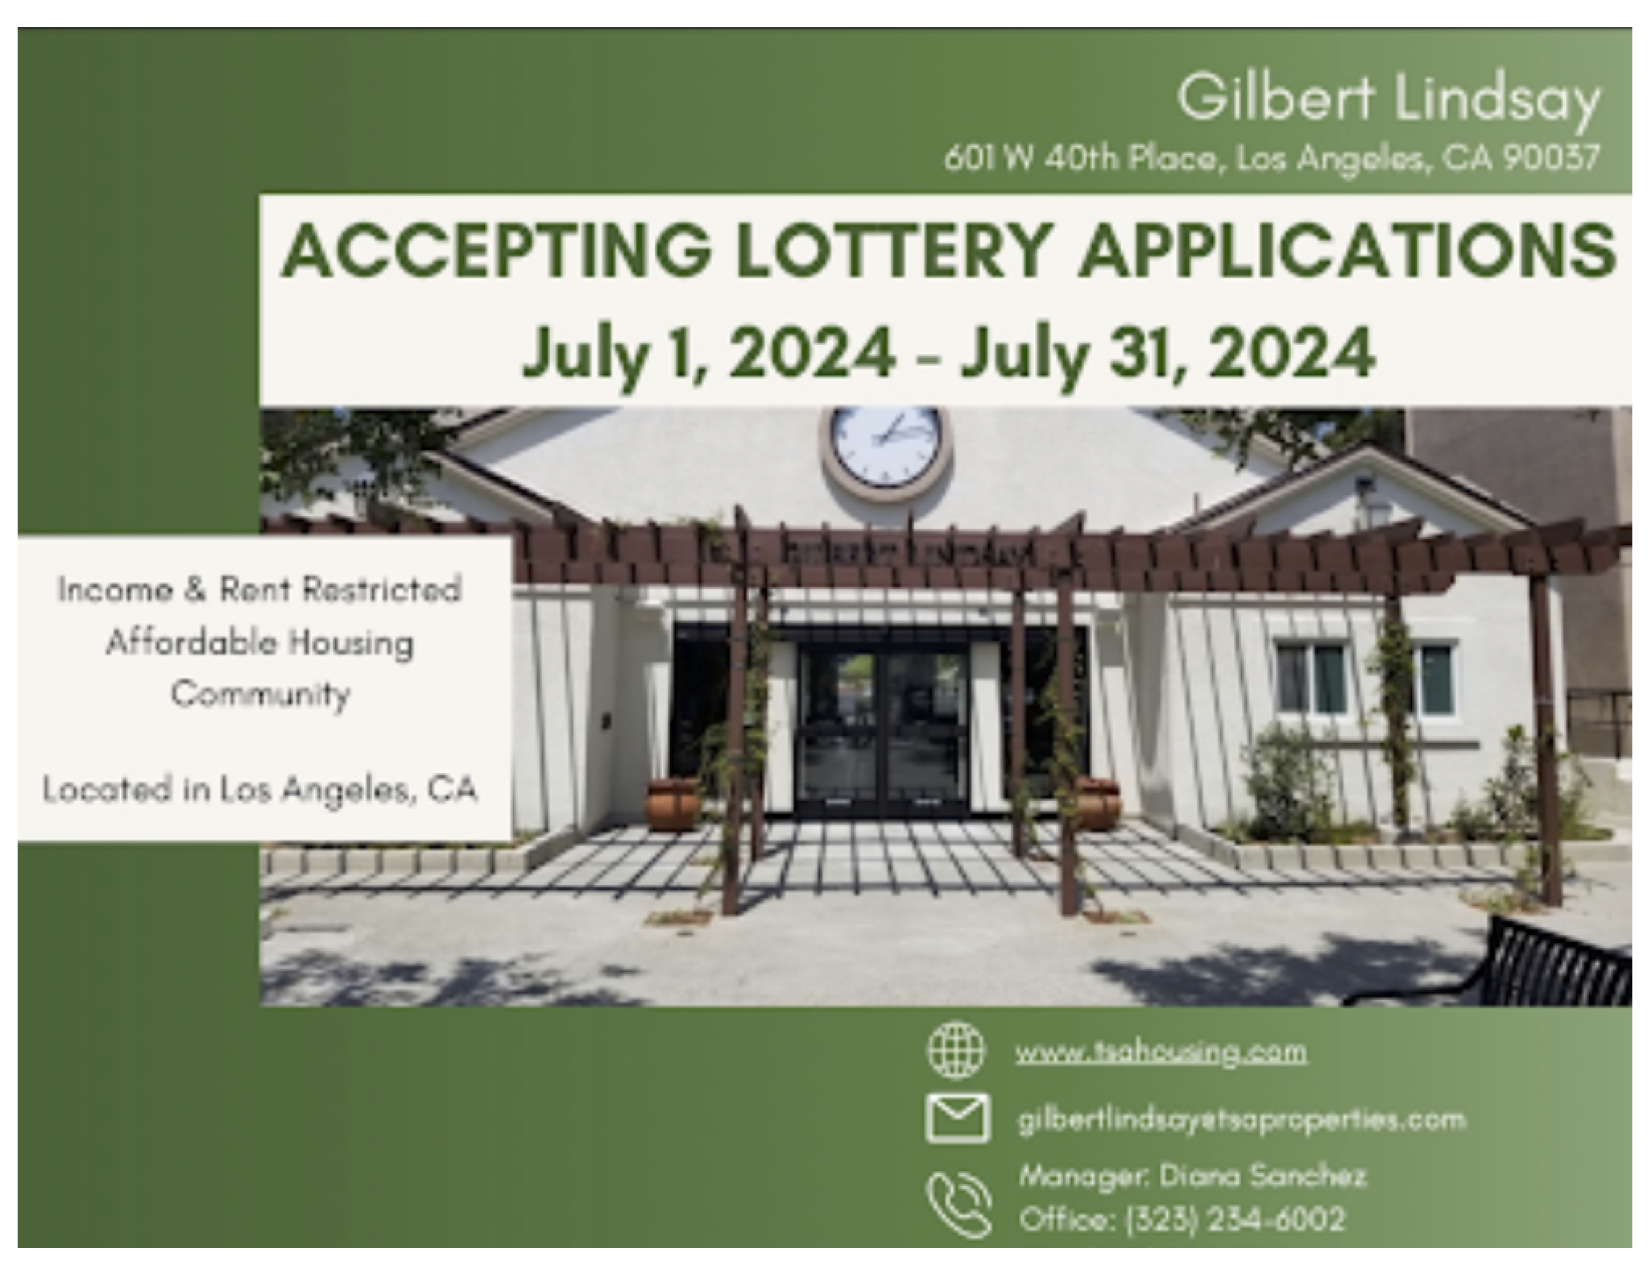 Gilbert Lindsay Manor Lottery Accepting Applications